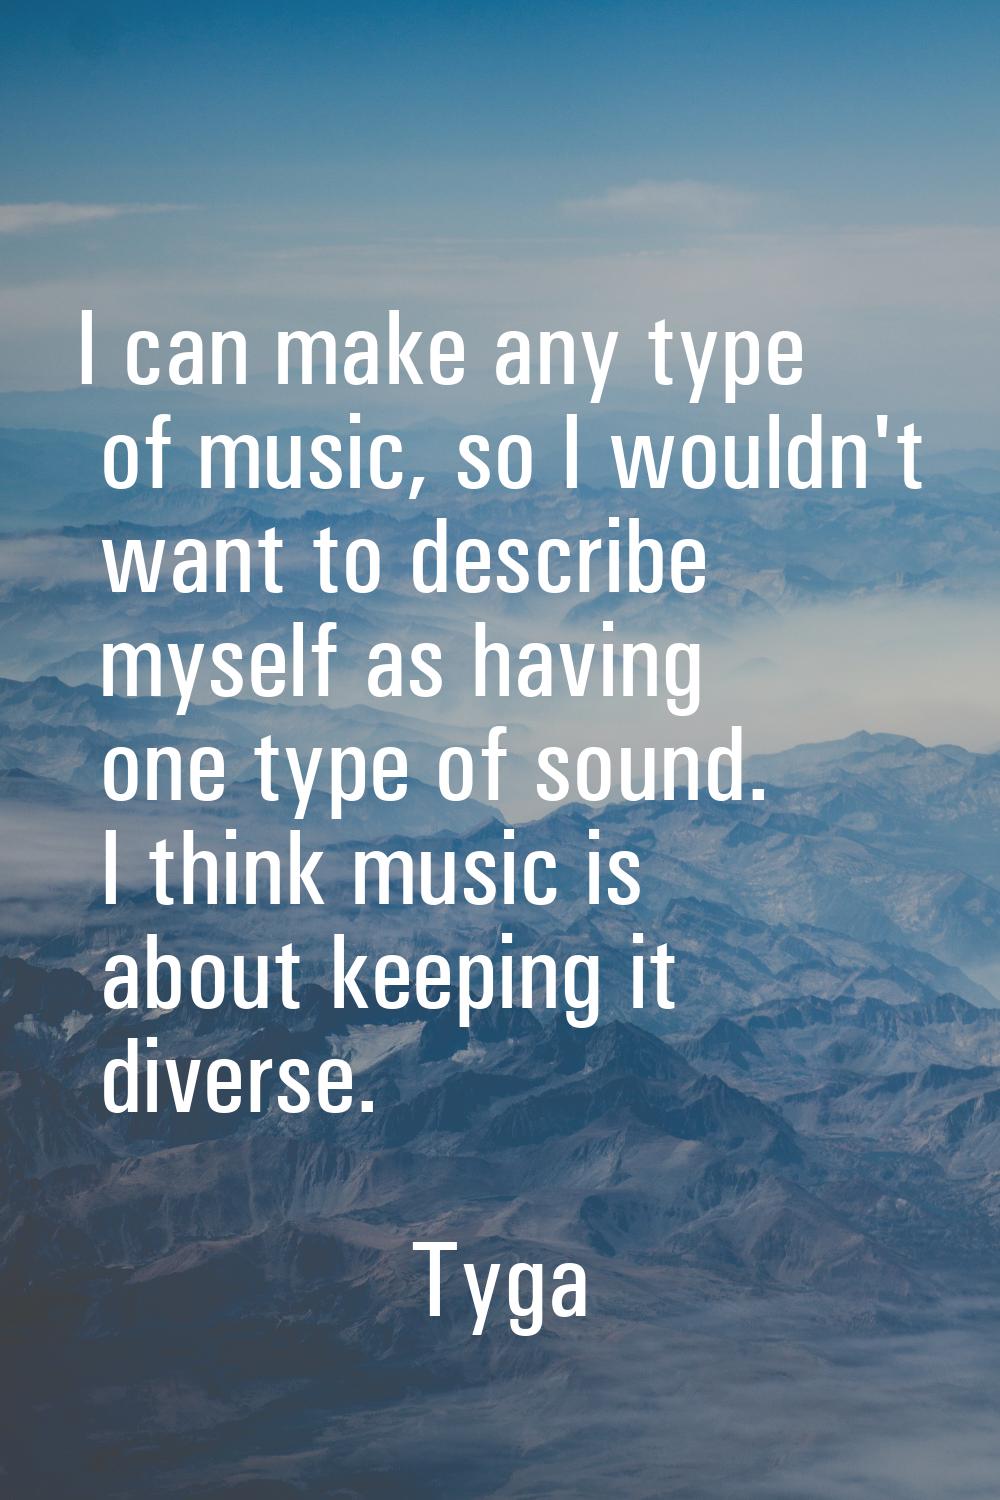 I can make any type of music, so I wouldn't want to describe myself as having one type of sound. I 